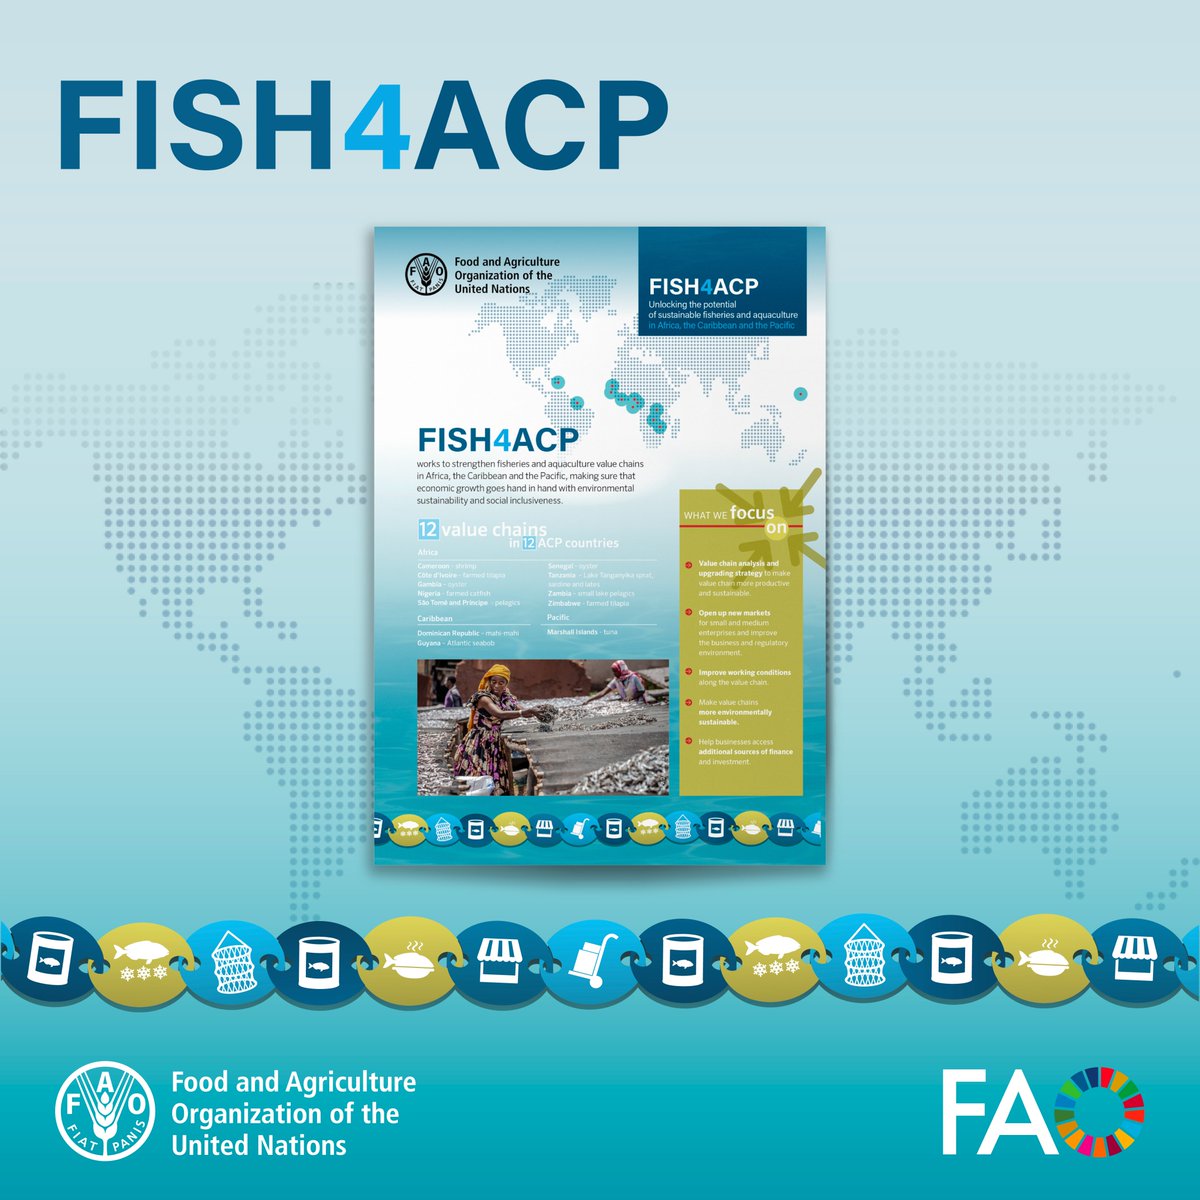 Discover how #FISH4ACP is driving aquatic value chain development in #Africa, the Caribbean & the Pacific in this new factsheet and, see how #BlueTransformation contributes to nourish people & safeguard our planet👉 bit.ly/3WwiBHM @EU_Partnerships @BMZ_Bund @PressACP